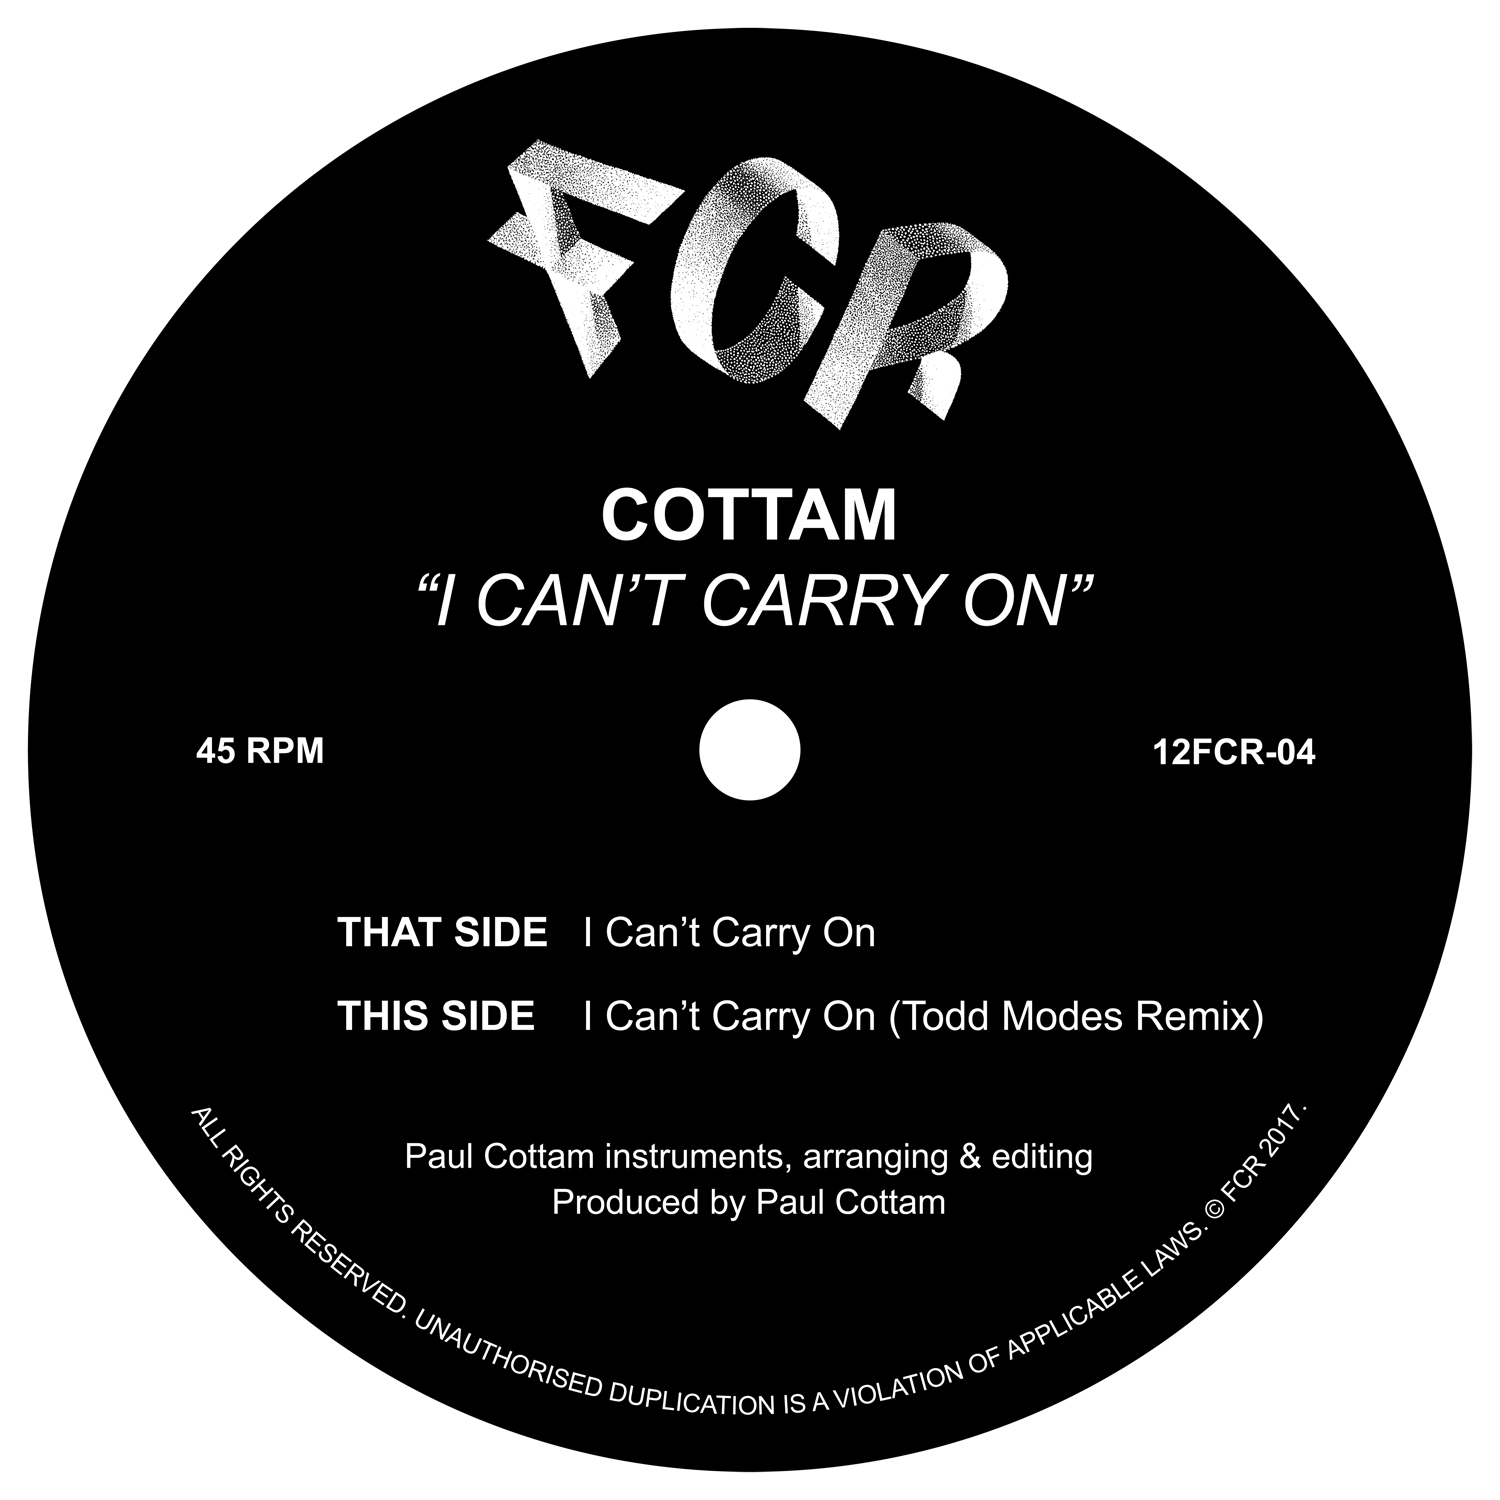 Cottam/I CAN'T CARRY ON 12"